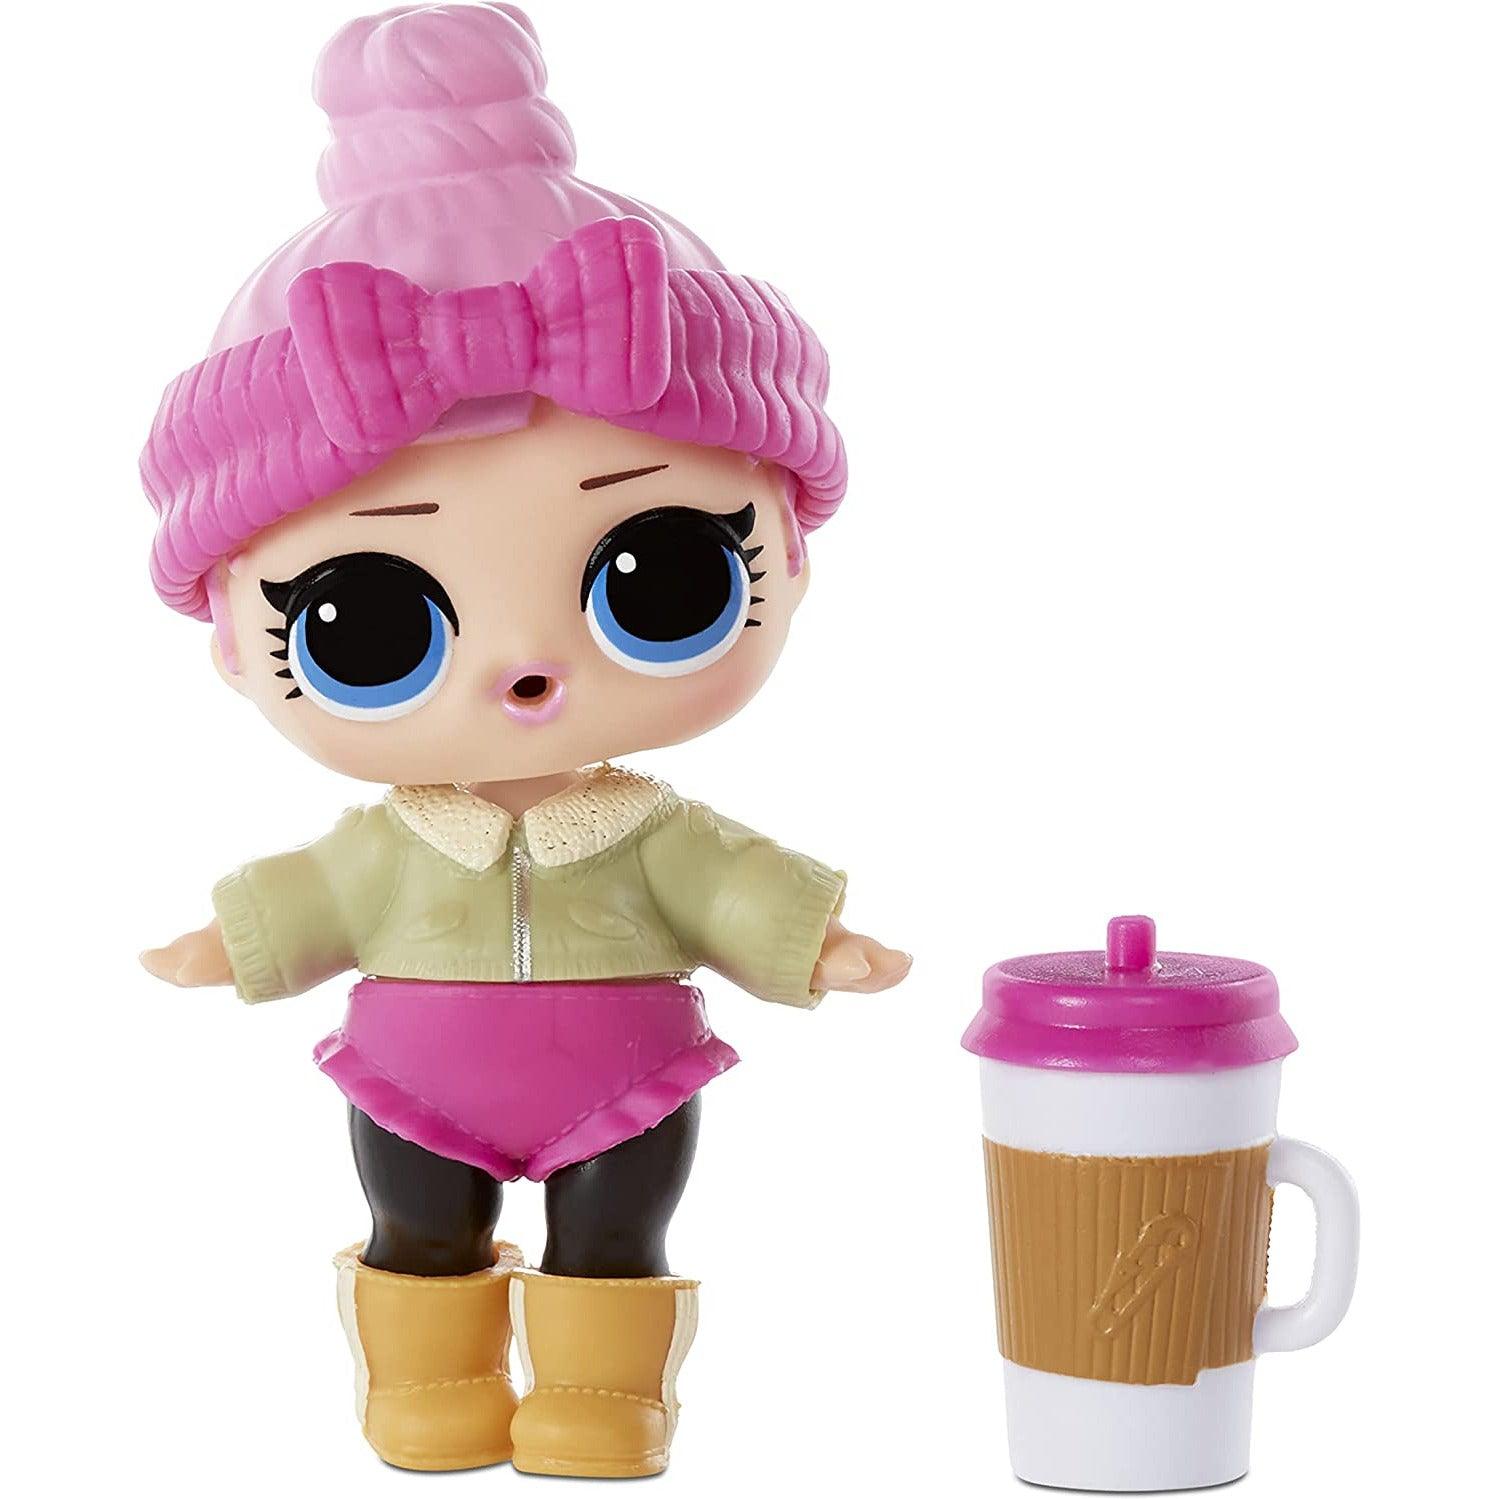 LOL Surprise Winter Chill Hangout Spaces Furniture Playset with Cozy Babe Doll - BumbleToys - 5-7 Years, Dolls, Fashion Dolls & Accessories, Girls, L.O.L, OXE, Pre-Order